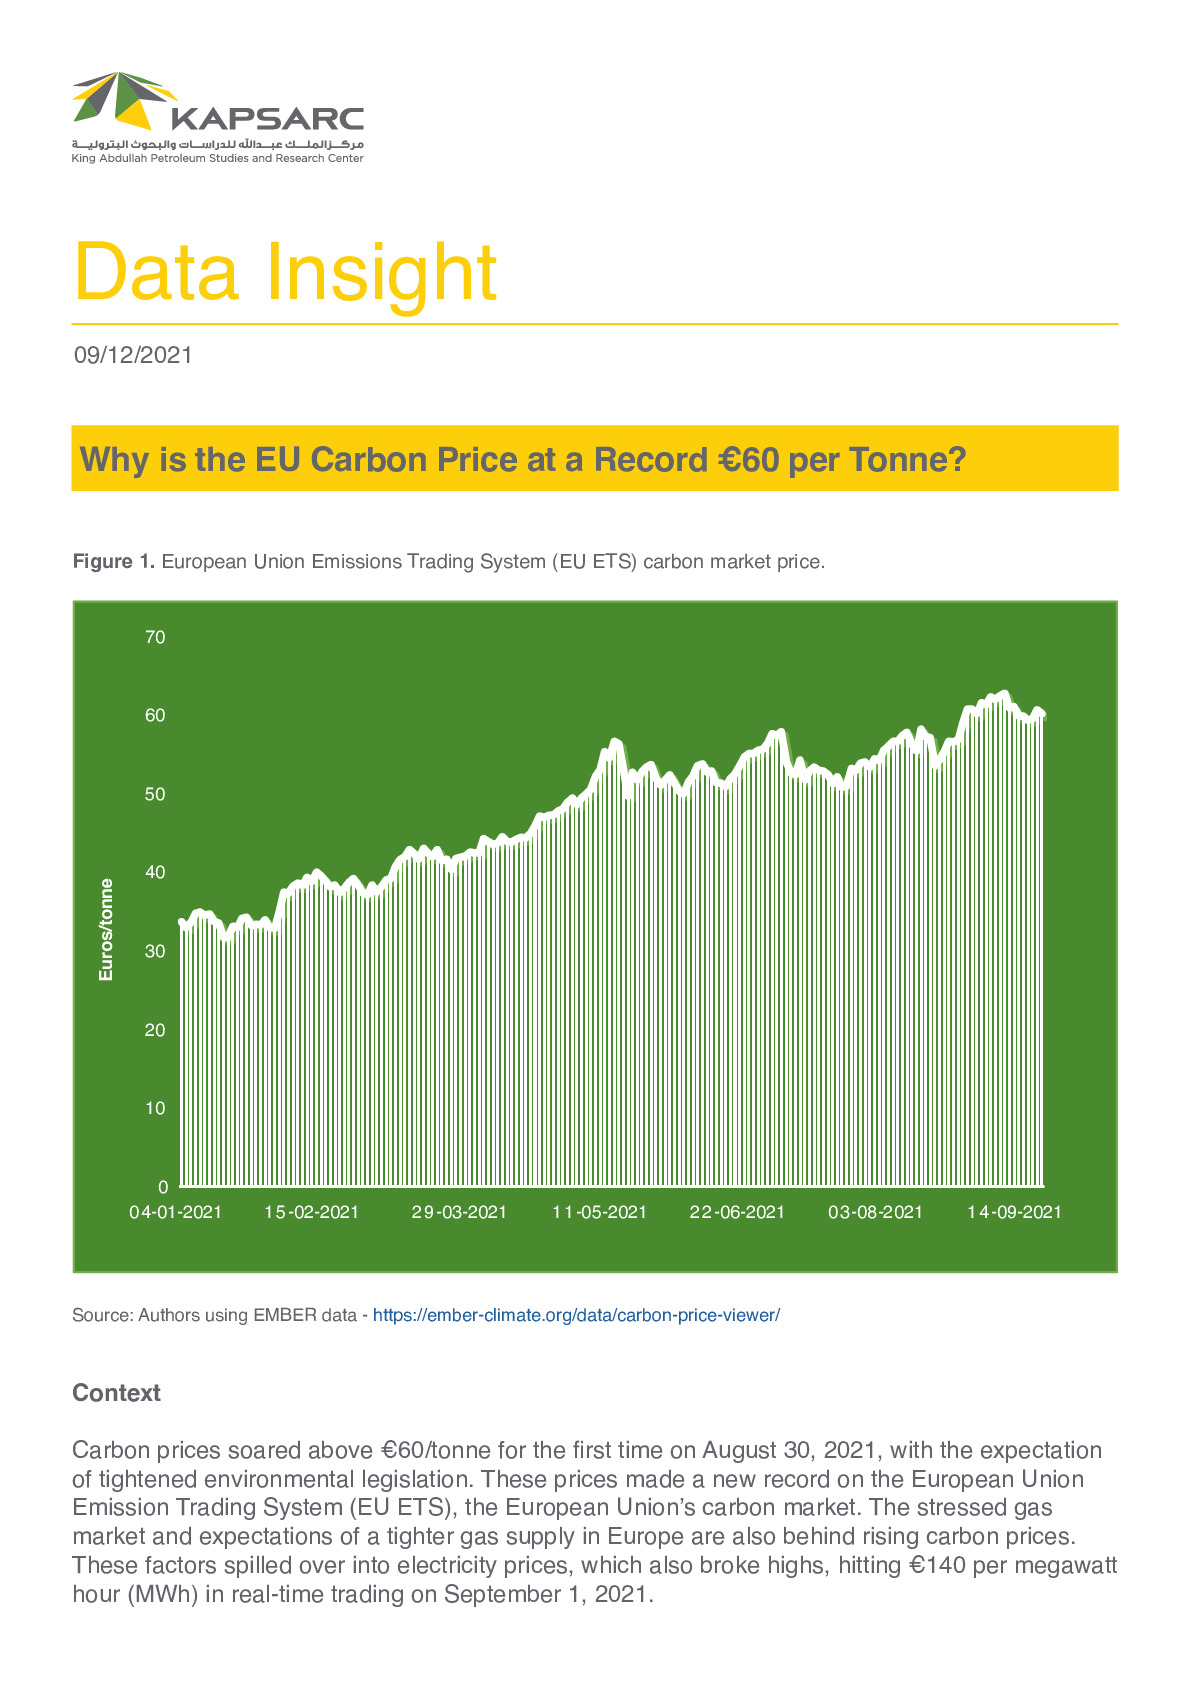 Why is the EU Carbon Price at a Record €60 per Tonne?